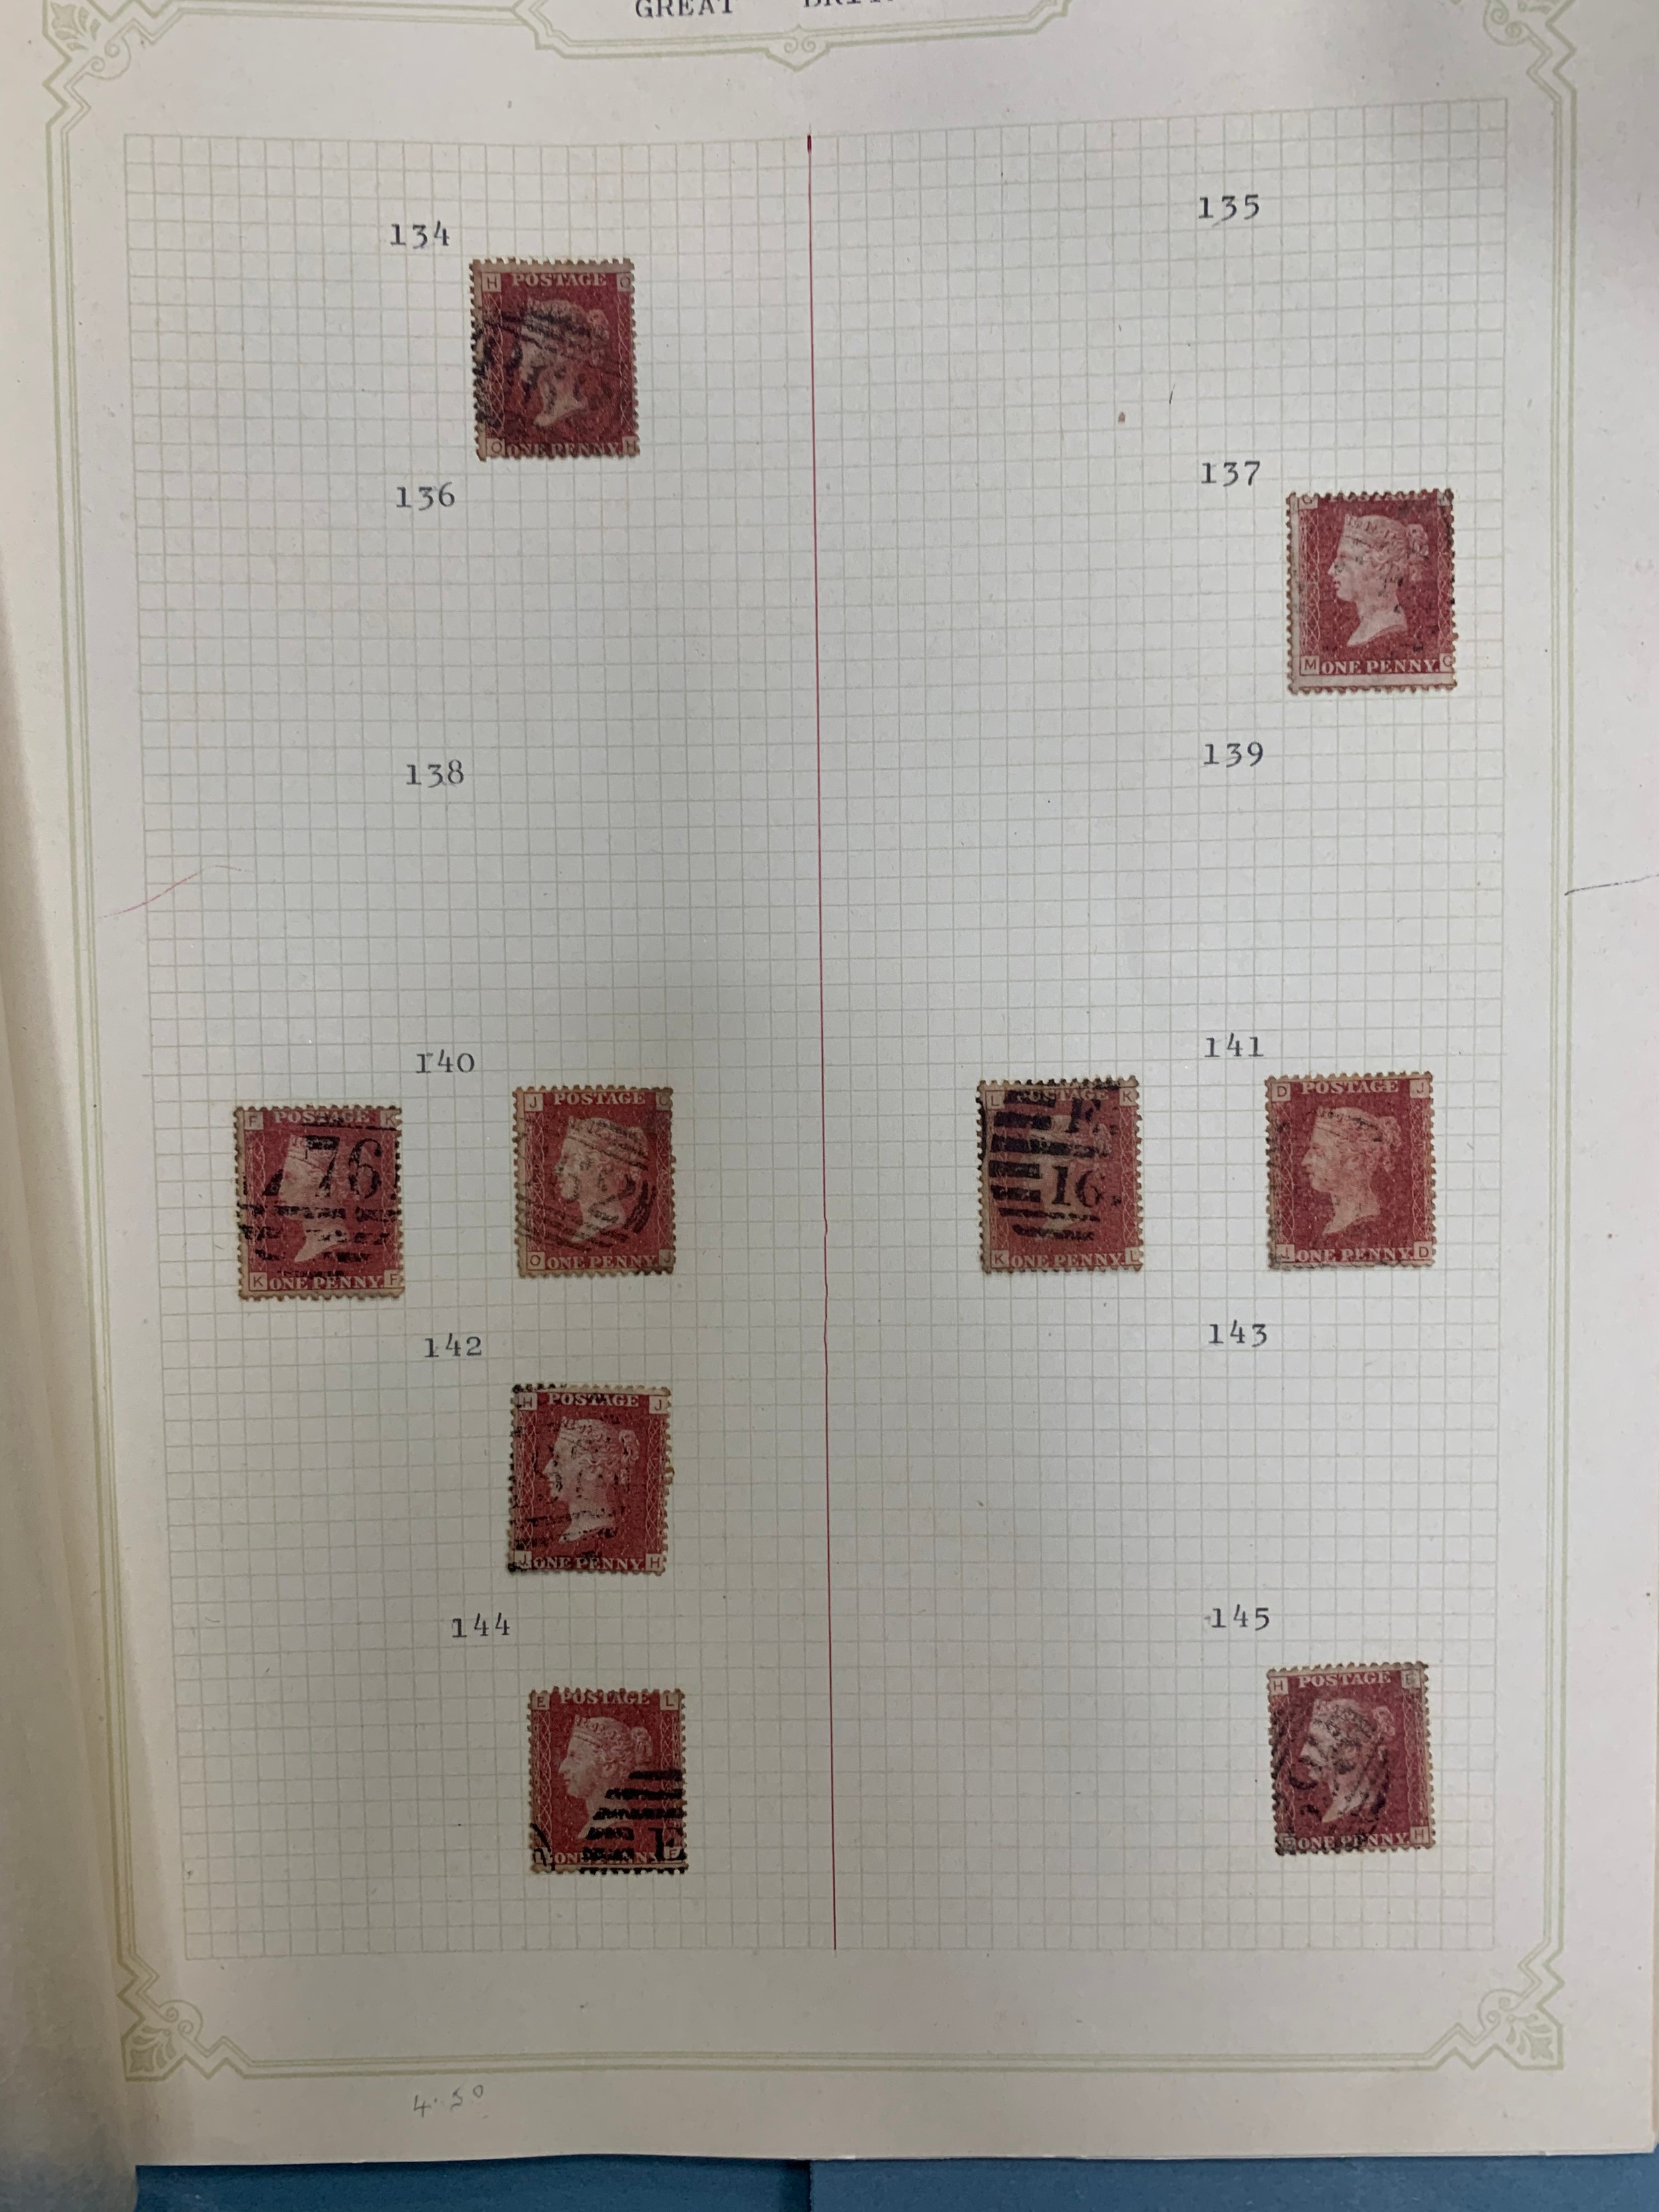 Great Britain, 1858-64 annotated and well-laid out collection of 1d Penny Reds FU from plate 73 to - Image 5 of 12